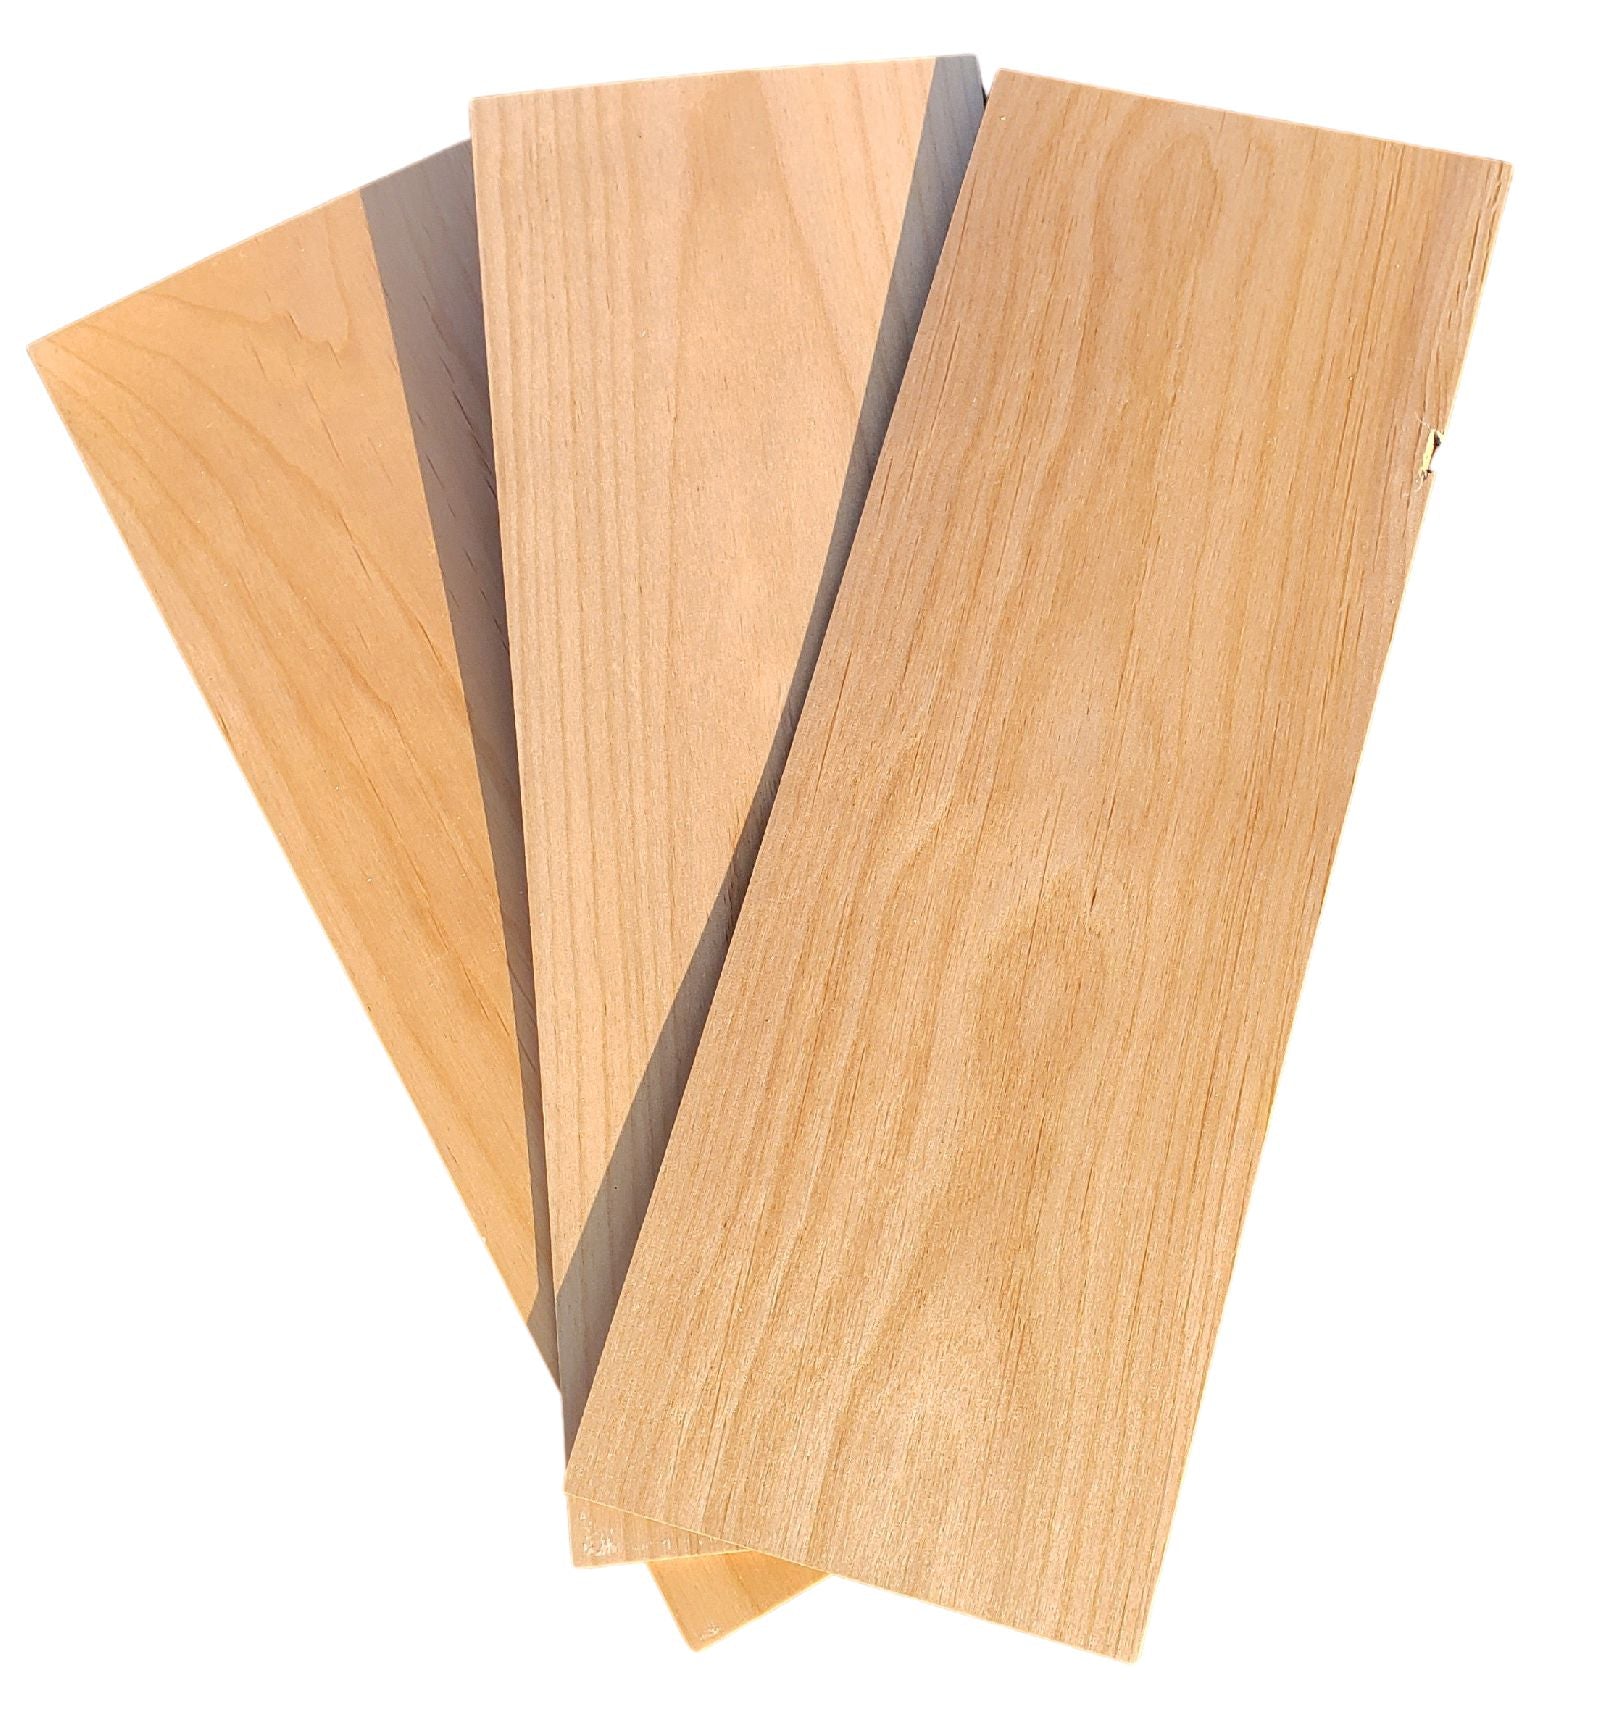 Alder Wood Strips, 1/16 thick 4.75x13.25 Pack of 10